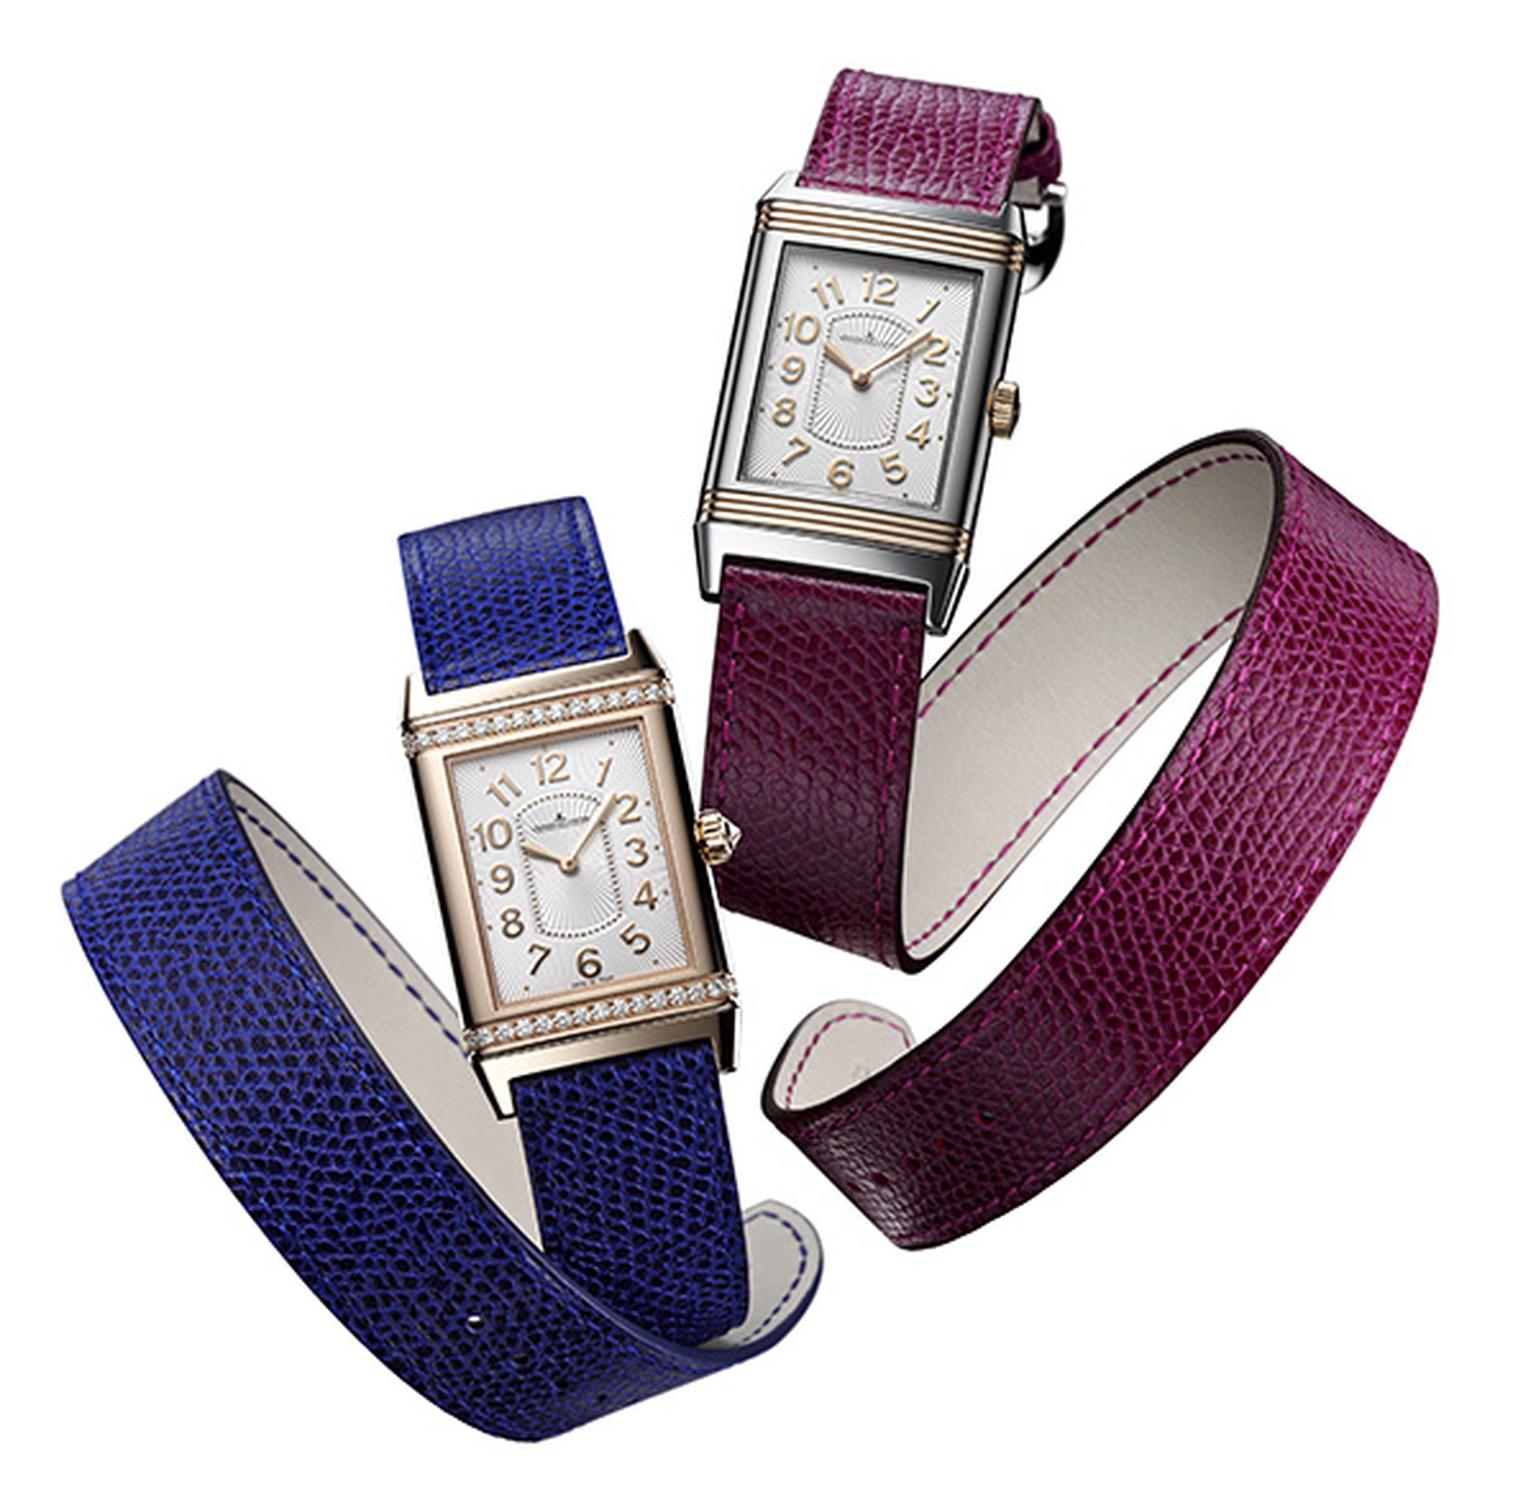 SIHH 2012 Jaeger-LeCoultre Reverso Lady Double Strap by Valextra